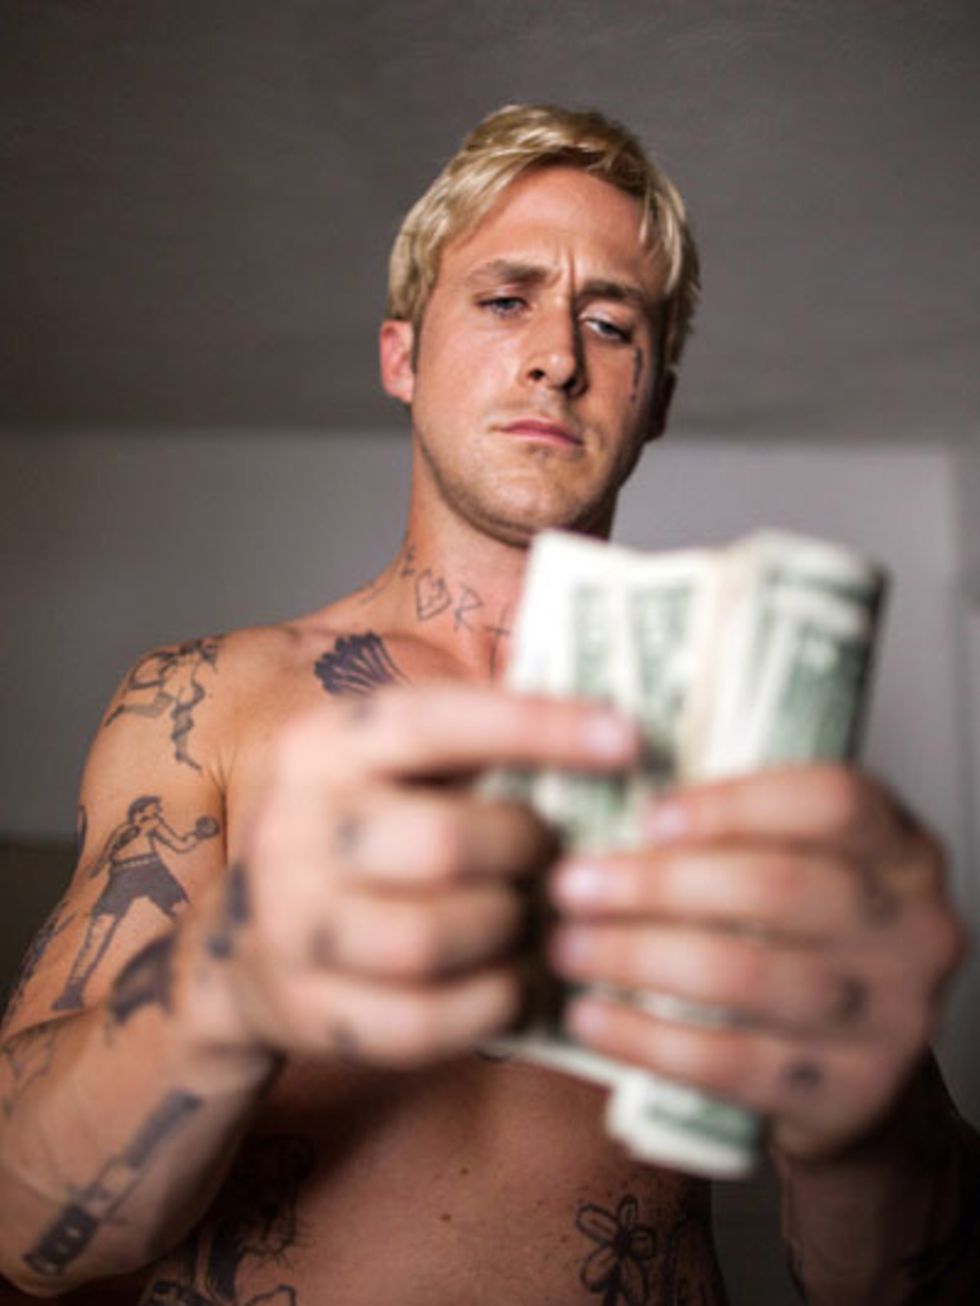 Tattoo, Skin, Facial hair, Barechested, Muscle, Chest, Trunk, Back, Banknote, Cash, 